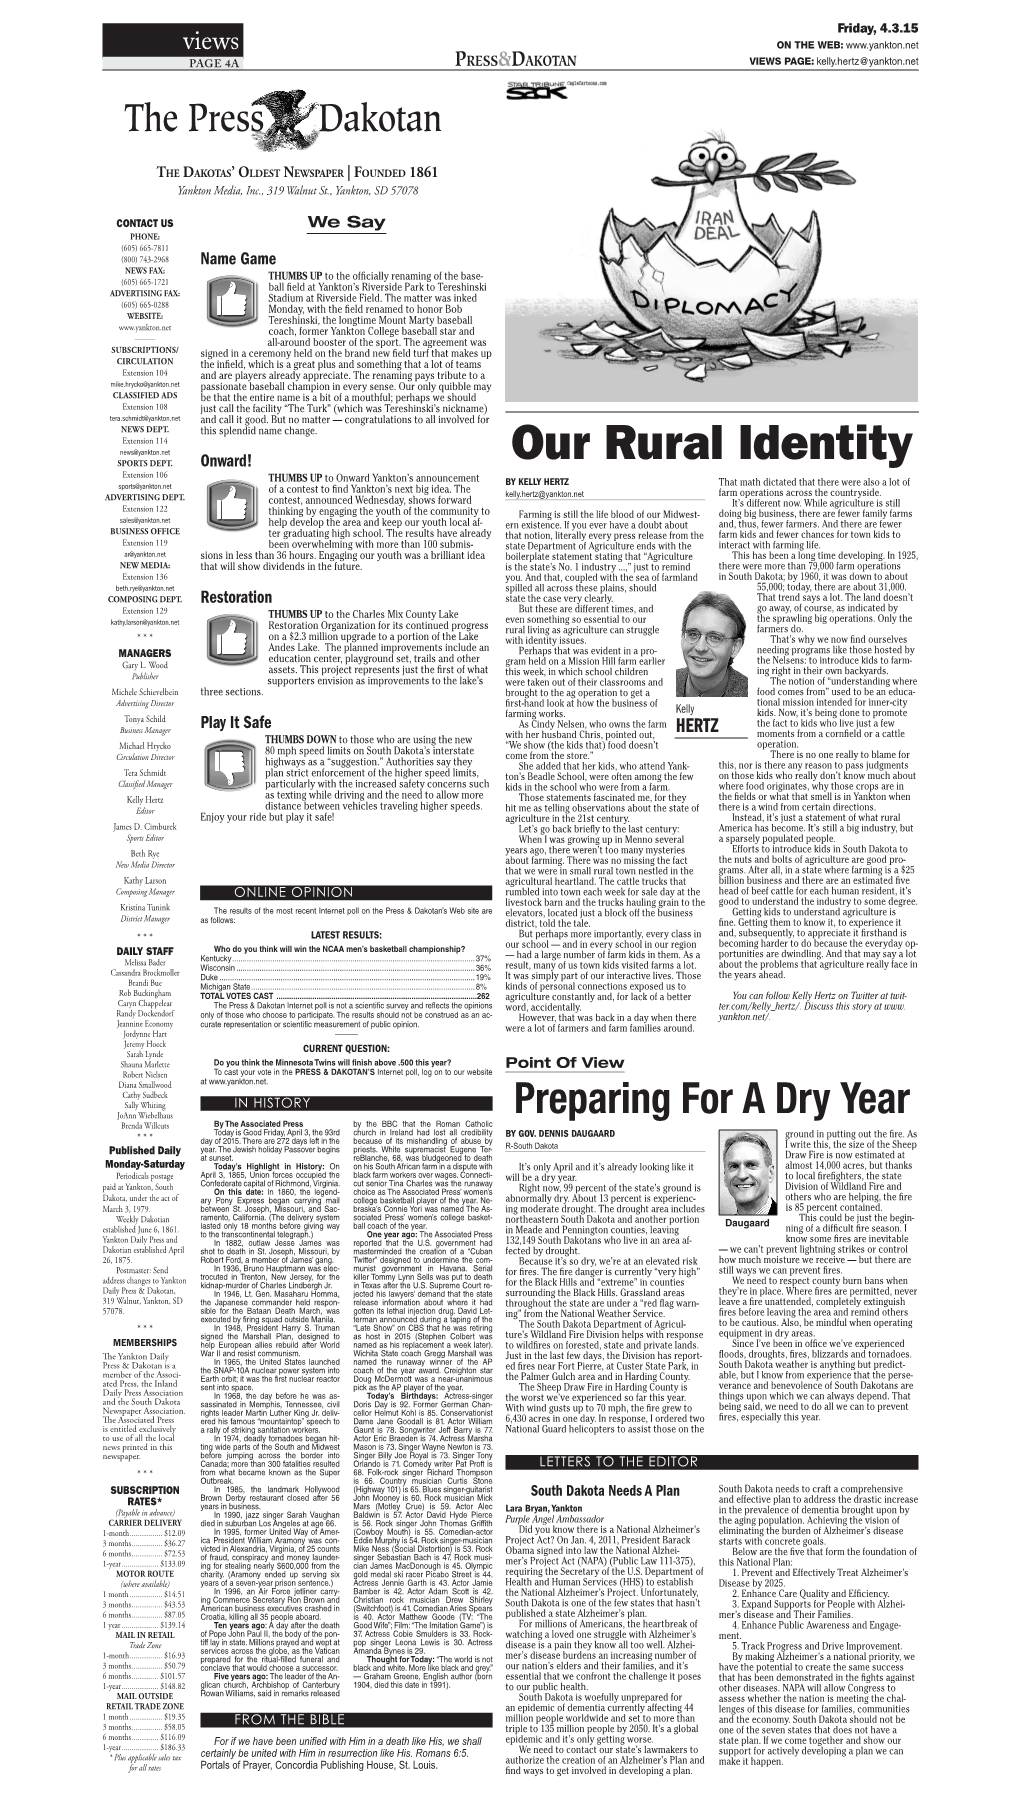 Our Rural Identity